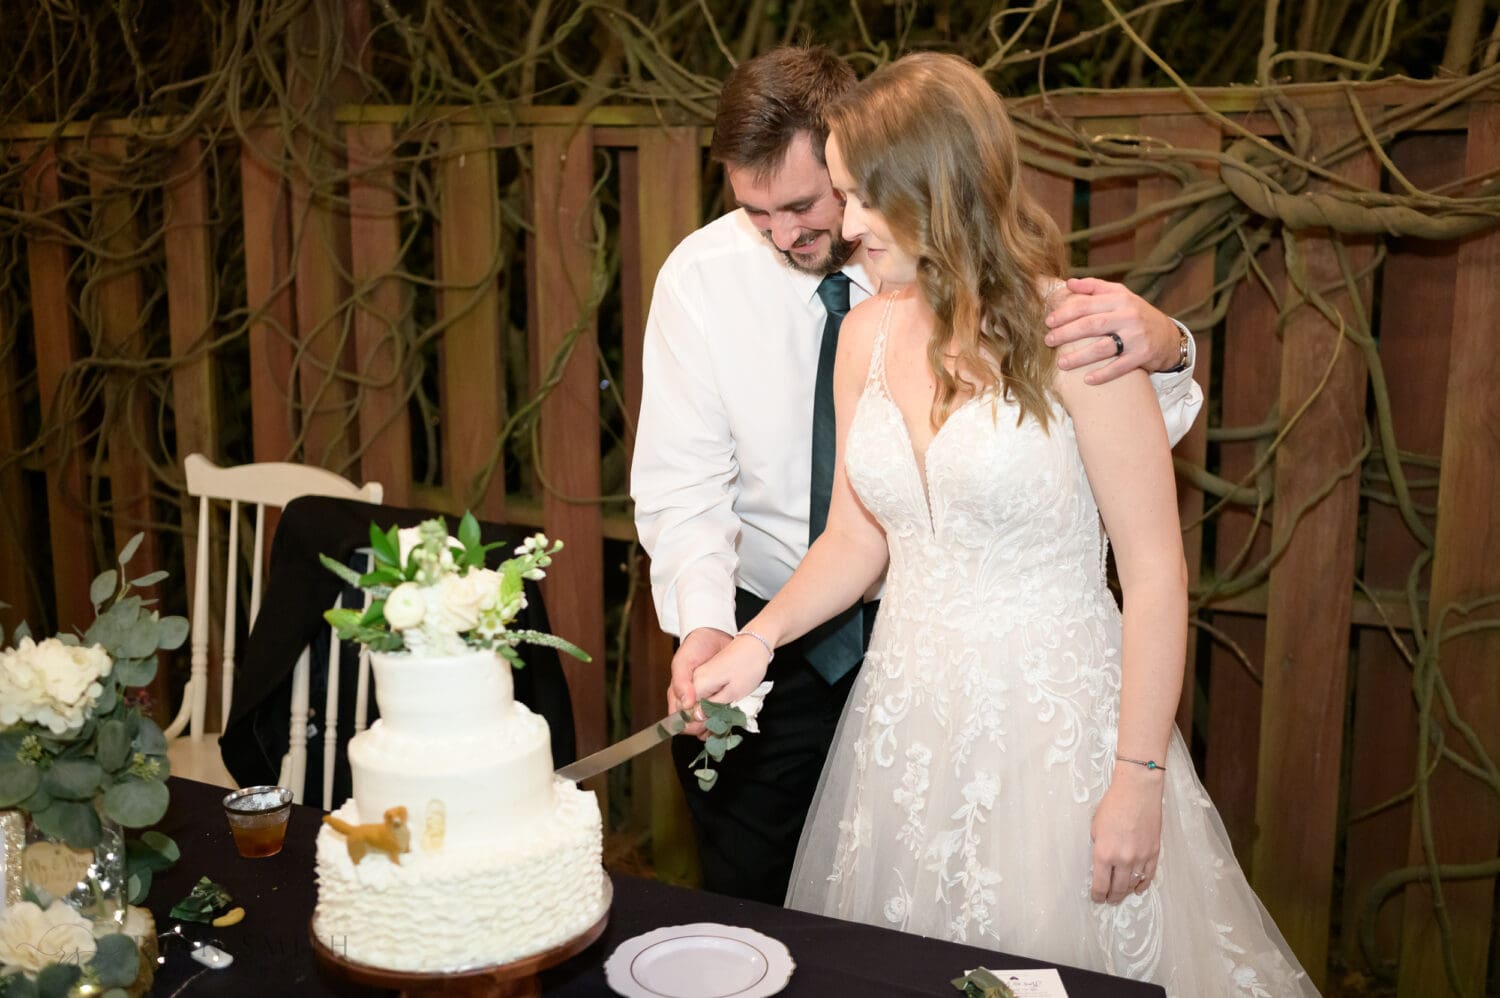 Cake cutting - South End Bistro